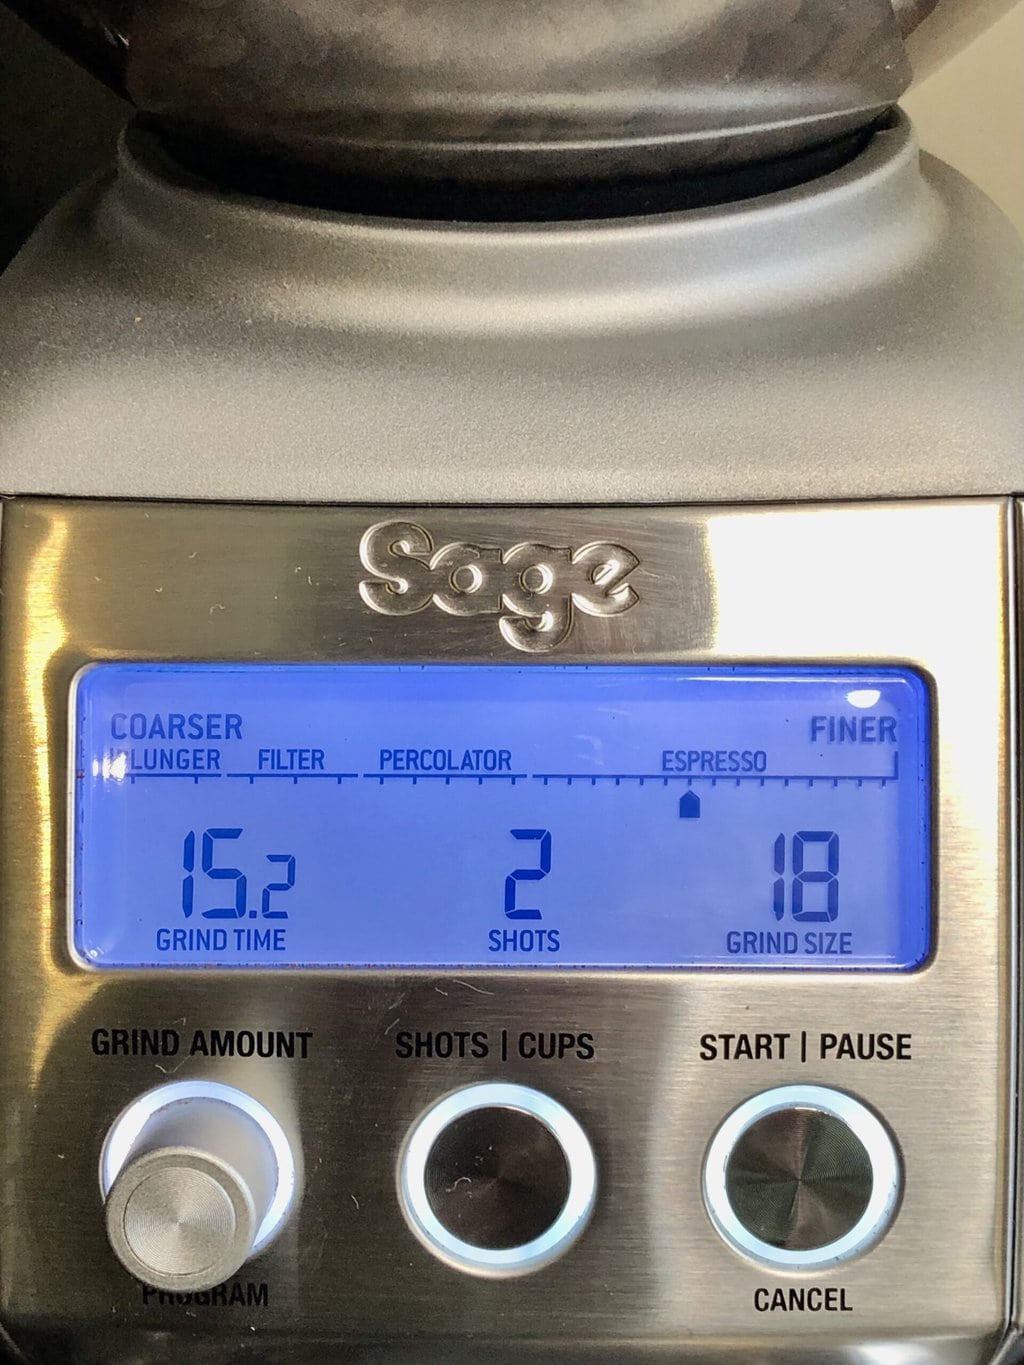 The Smart Grinder Pro has a digital LCD display